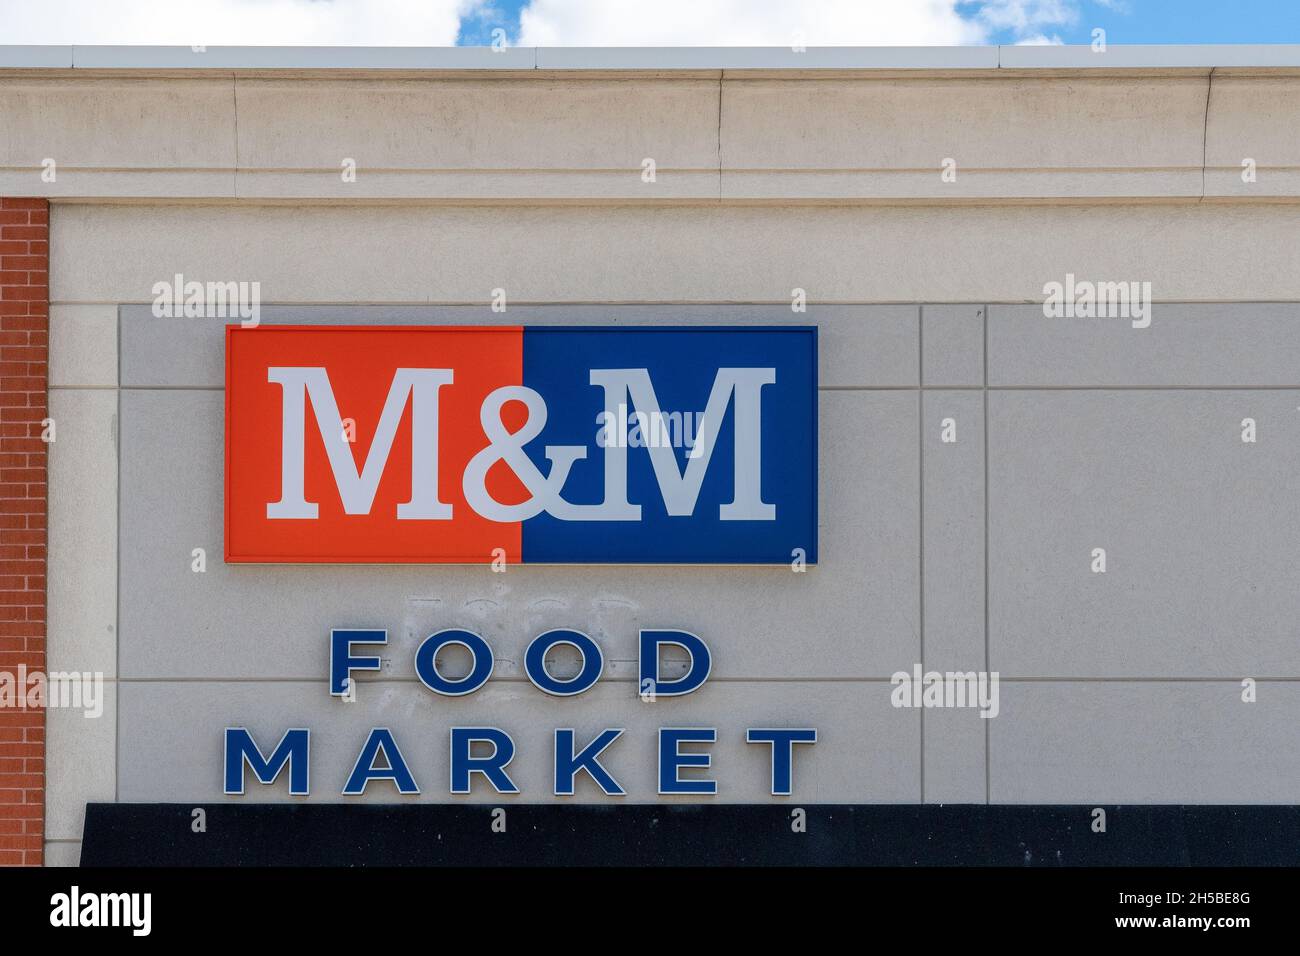 Entrance sign of an M&M Food Market seen in Toronto, Canada. Nov. 7, 2021 Stock Photo